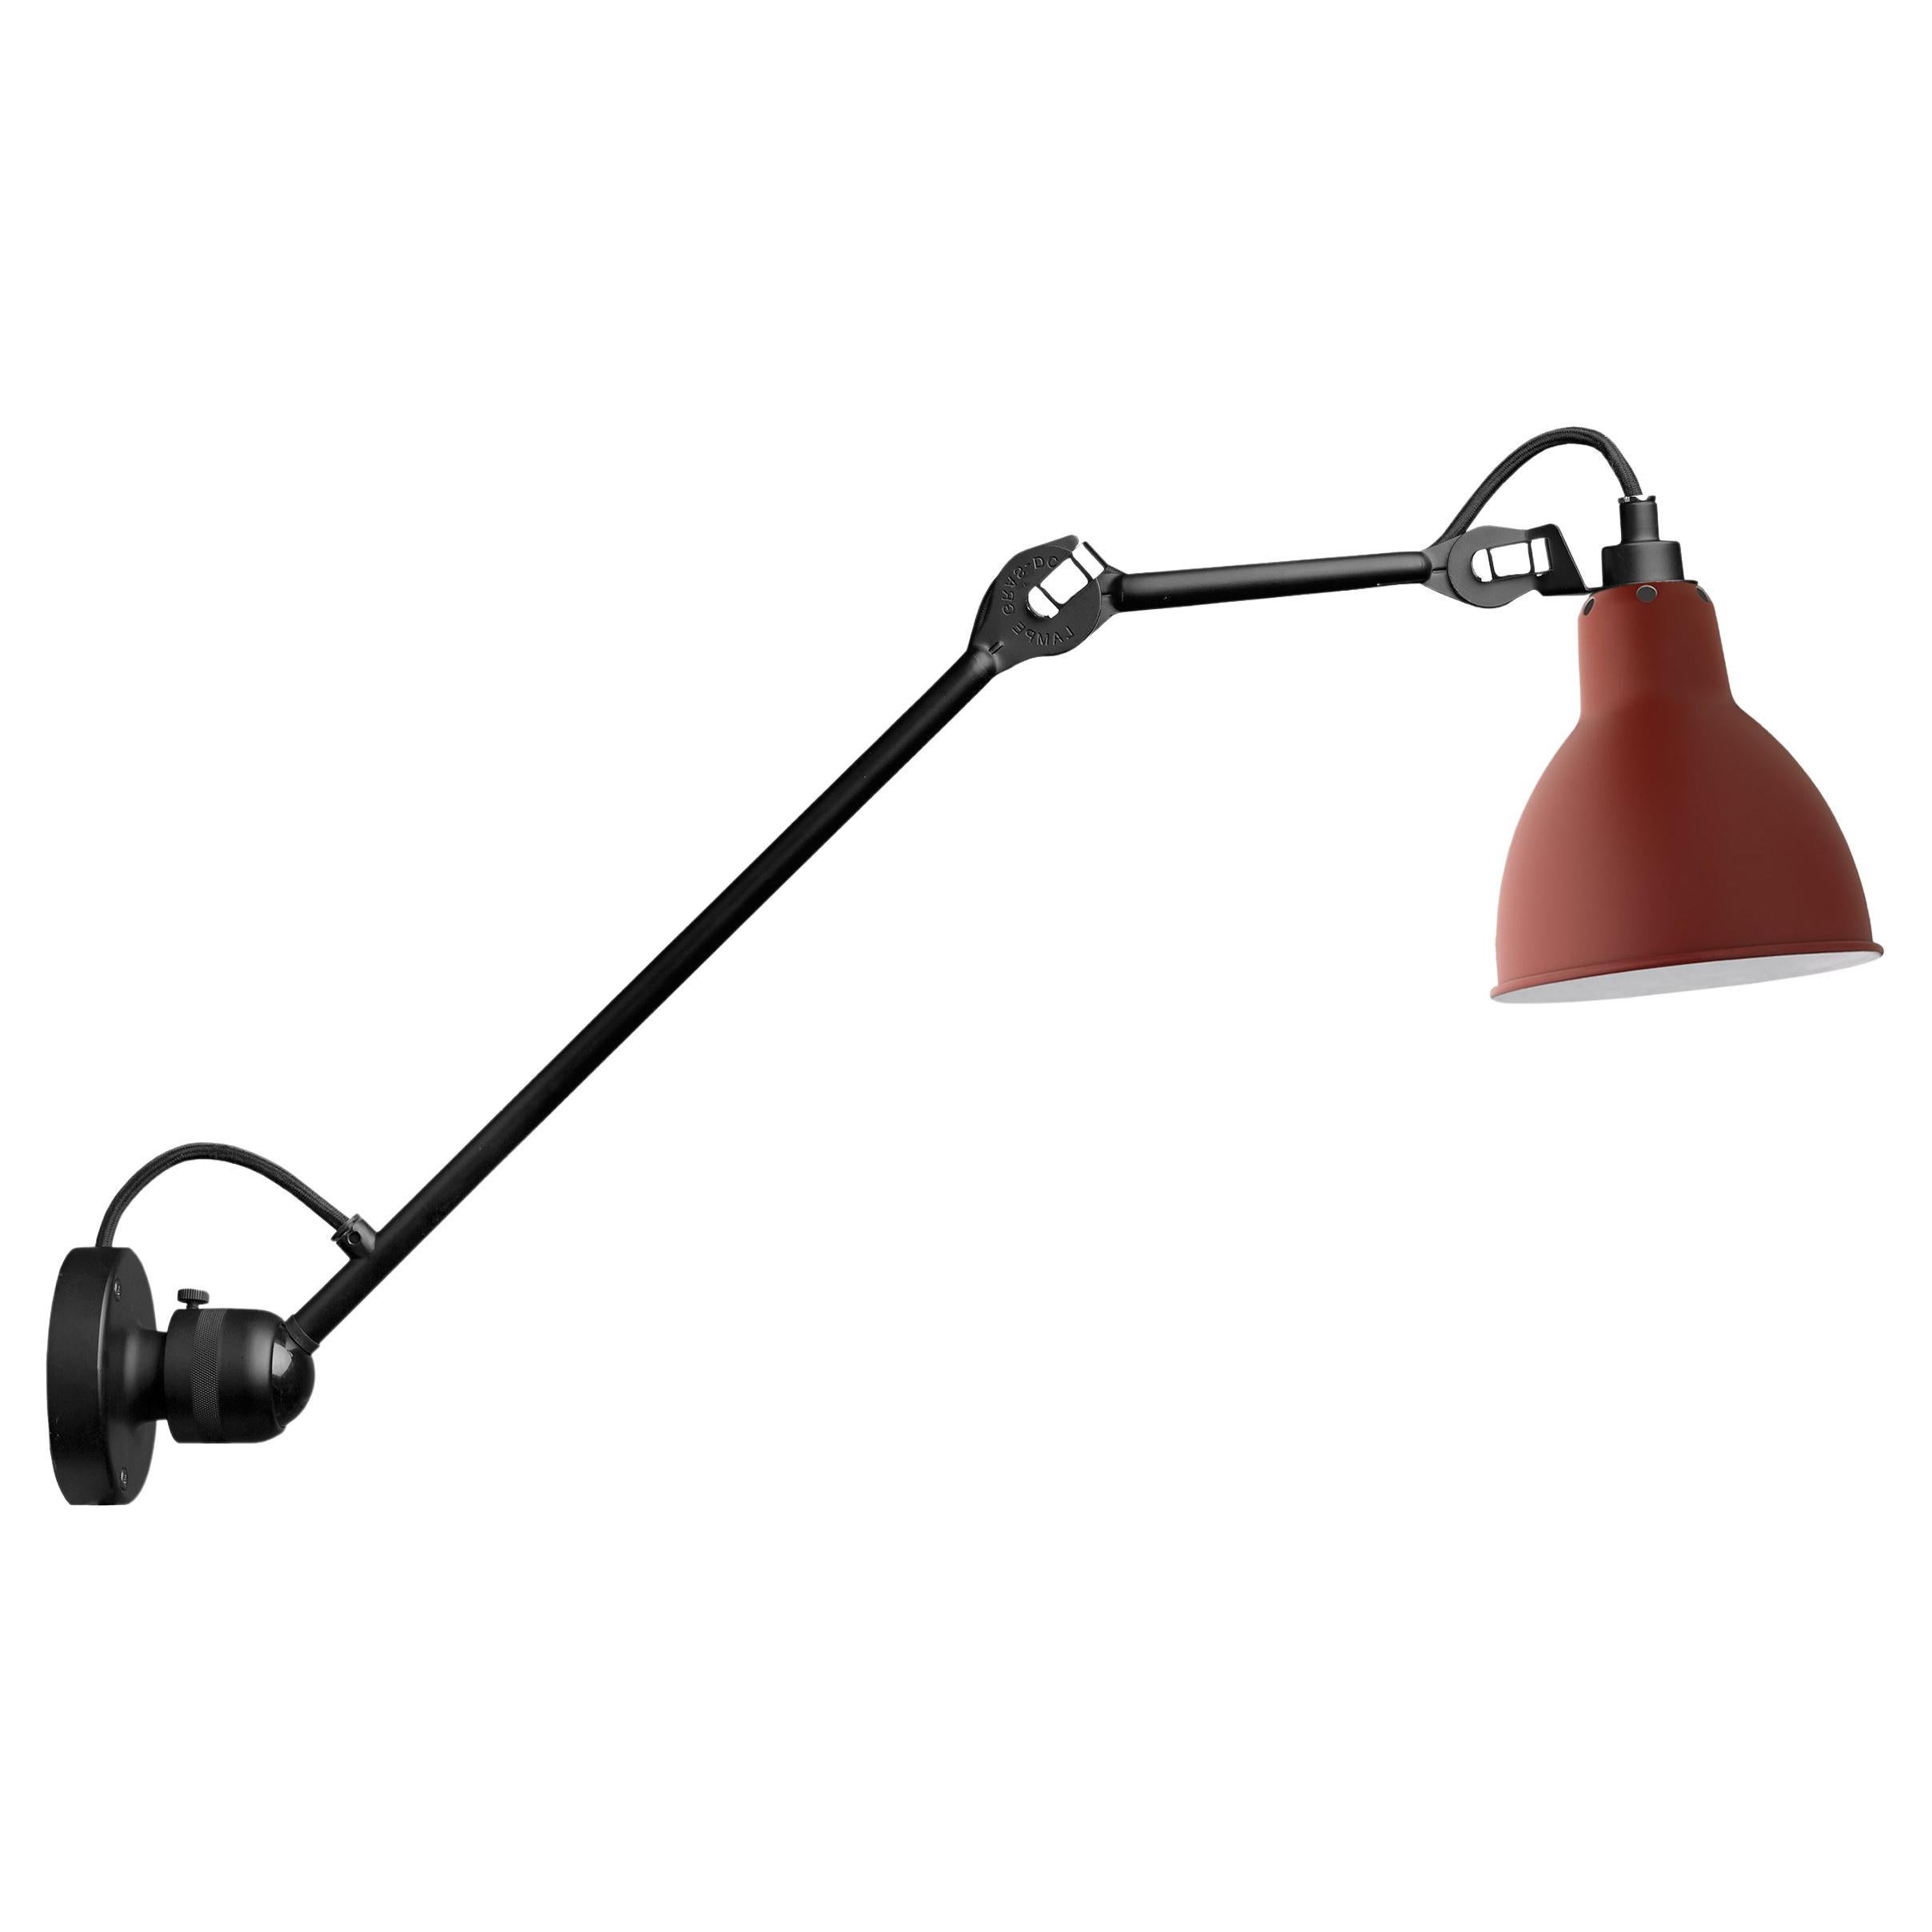 DCW Editions La Lampe Gras N°304 L40 Wall Lamp in Black Arm and Red Shade